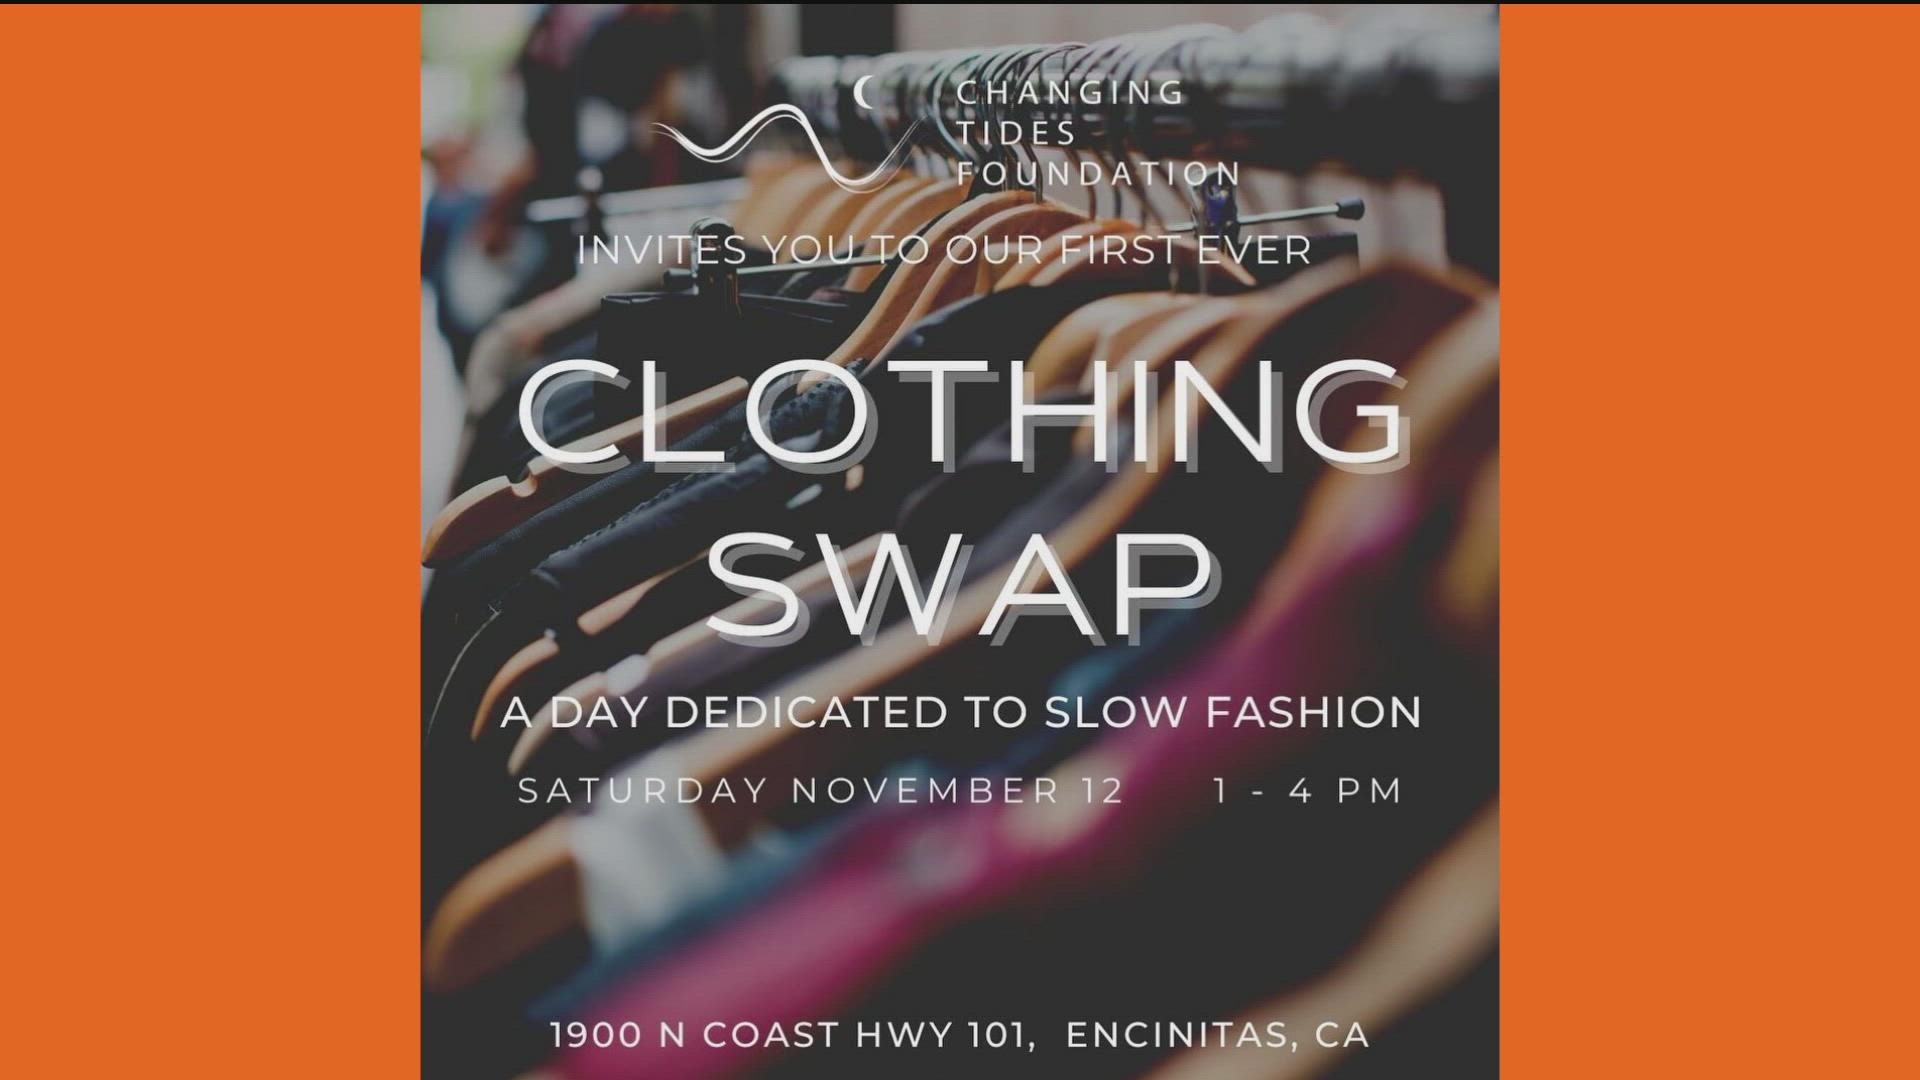 The clothing swap will be at 1900 N Coast HWY 101 Encinitas CA Saturday, Nov. 12 from 1pm to 4pm. Visit: changingtidesfoundation.org